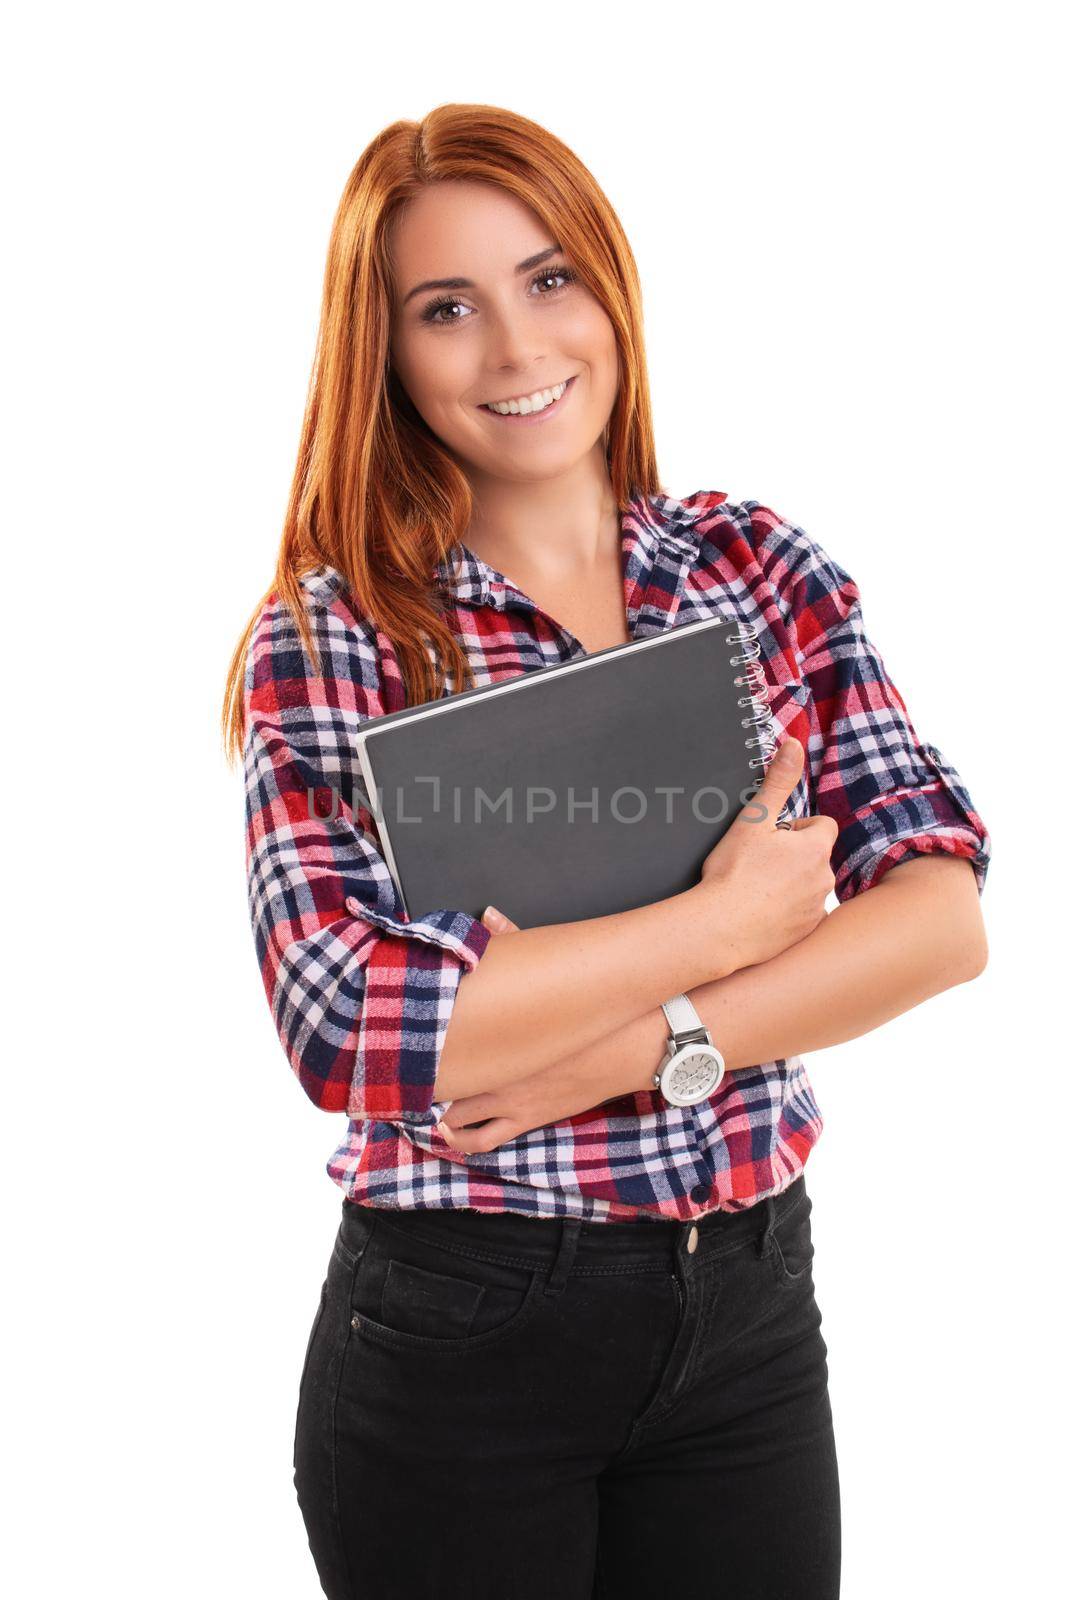 Smiling young redhead woman in plaid shirt holding a notebook in front of her, isolated on white background. Education, study, exams, achievement concept.